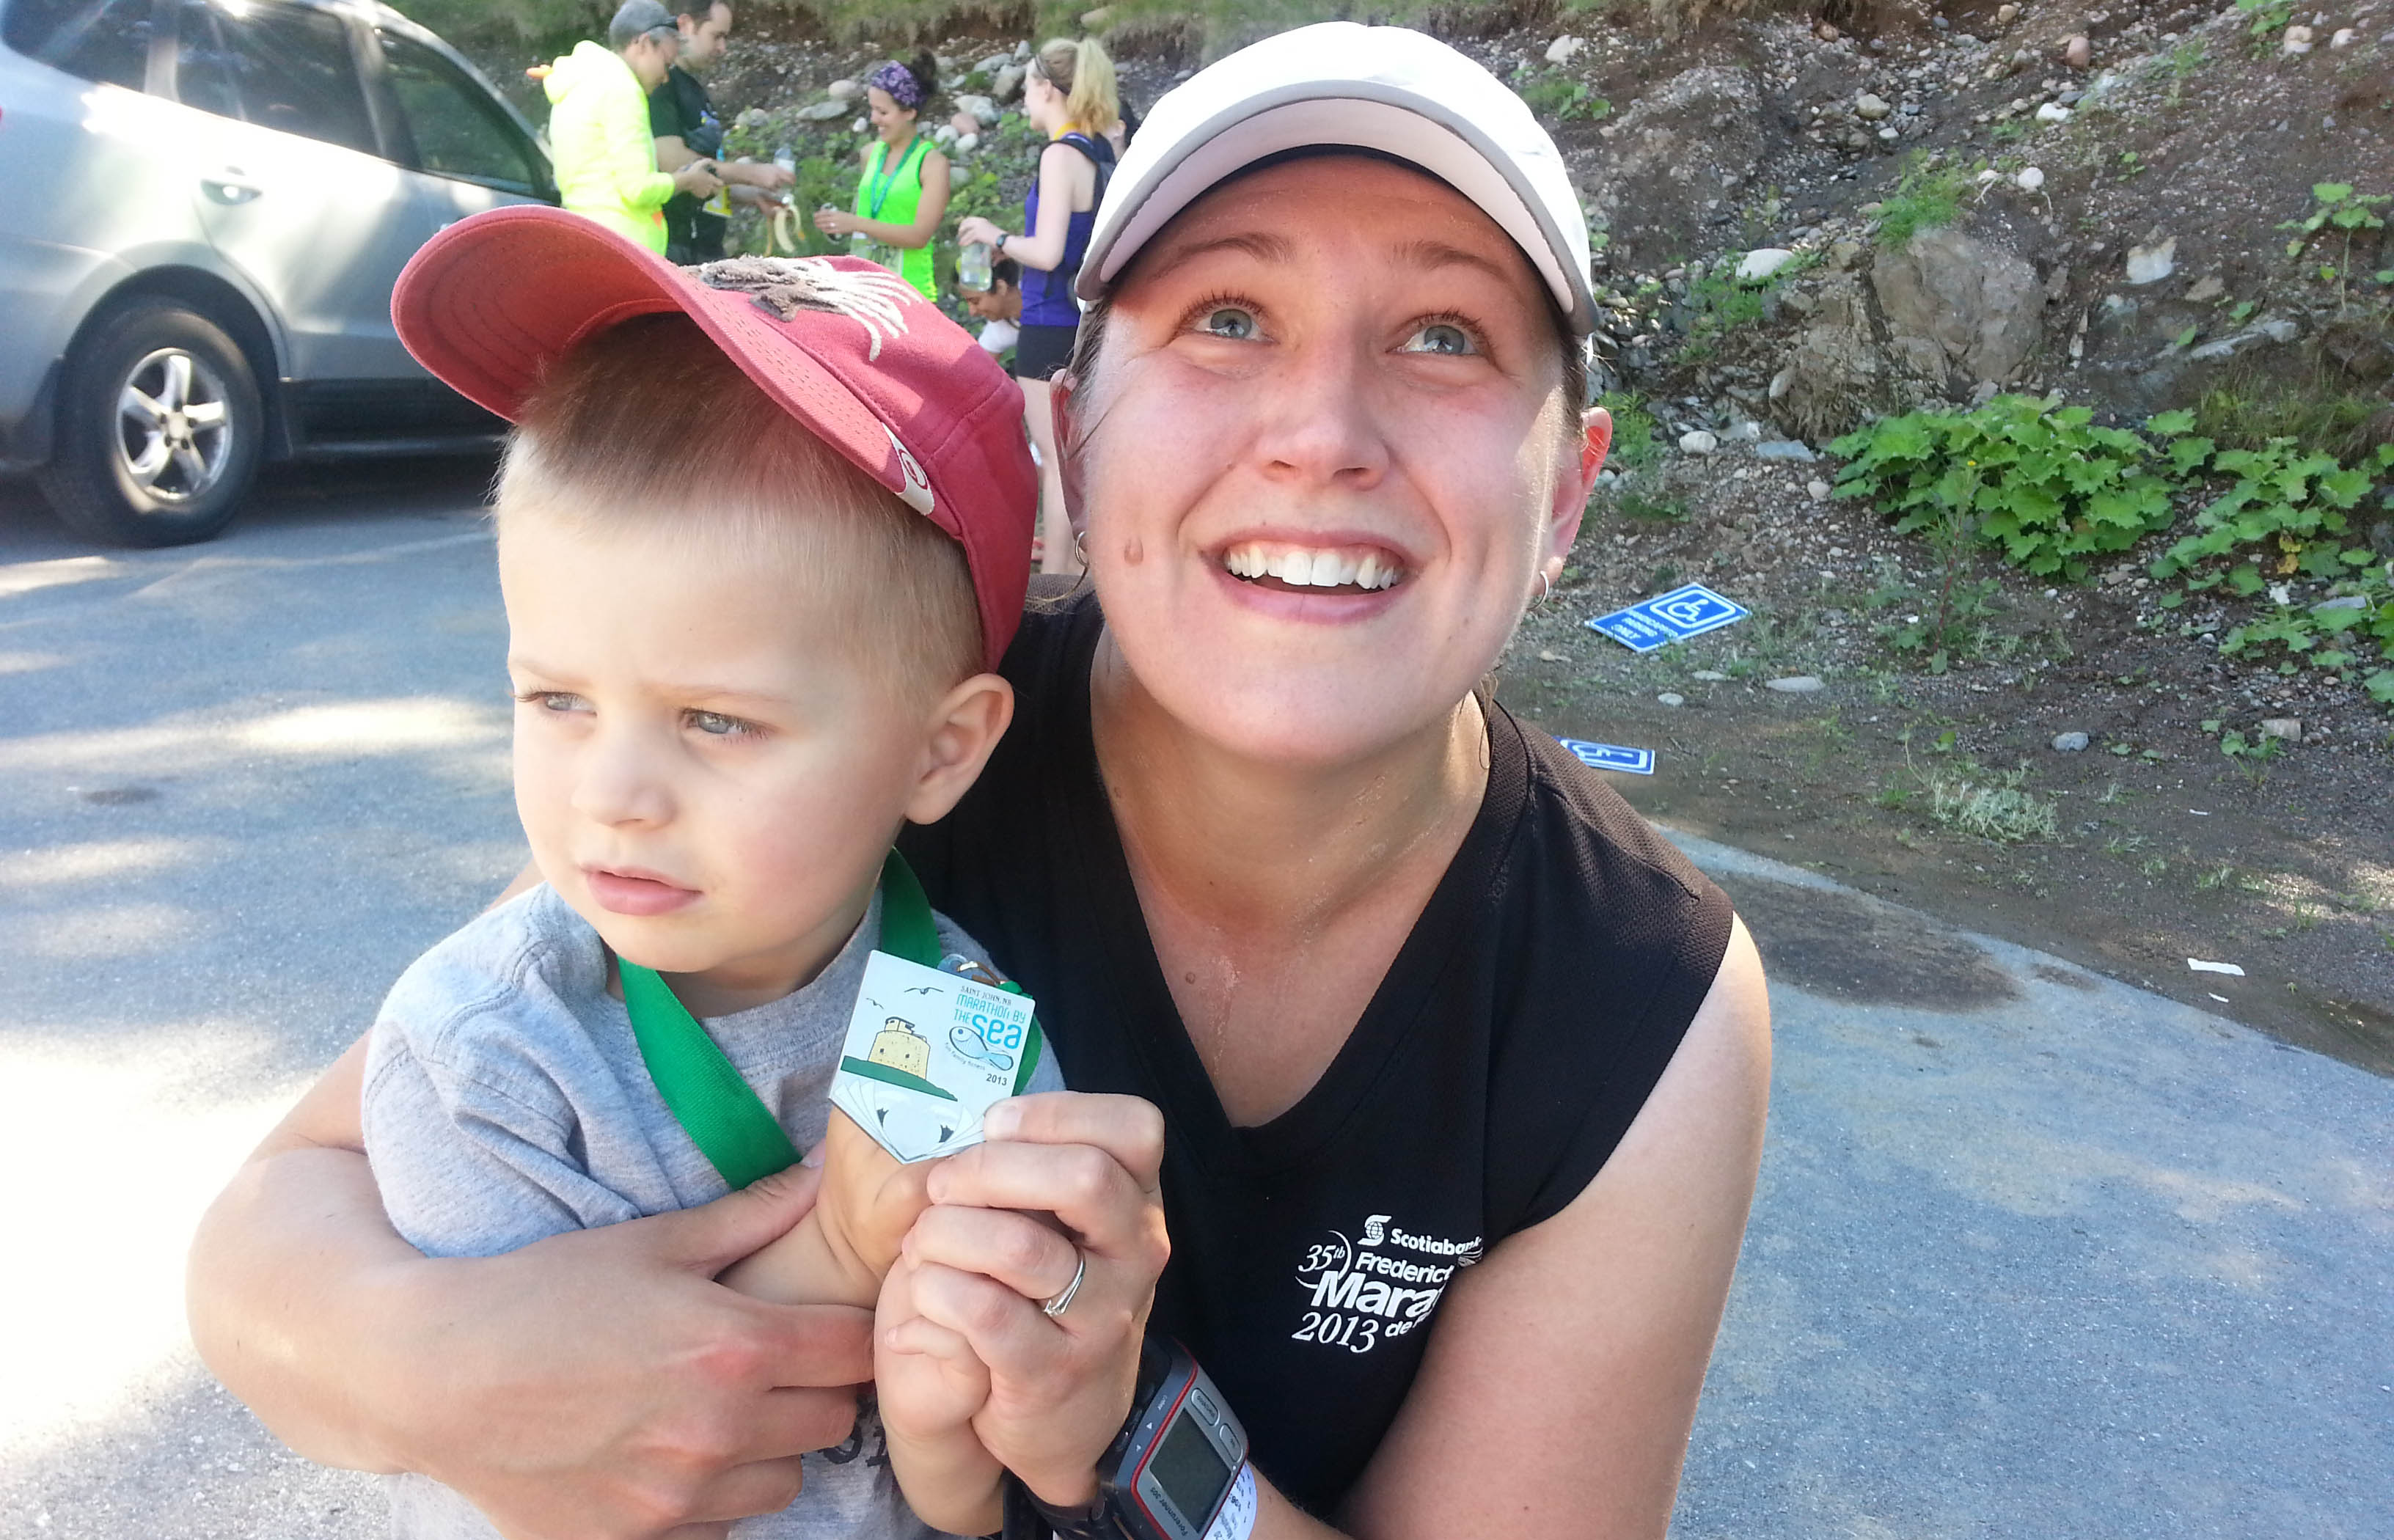 An emotional Samantha MacAlpine holds her son at the finish line of the 2013 Marathon by the Sea half marathon. Earlier that morning, she learned her grandfa-ther passed away. She wears his dog tags as a good luck charm when she runs.